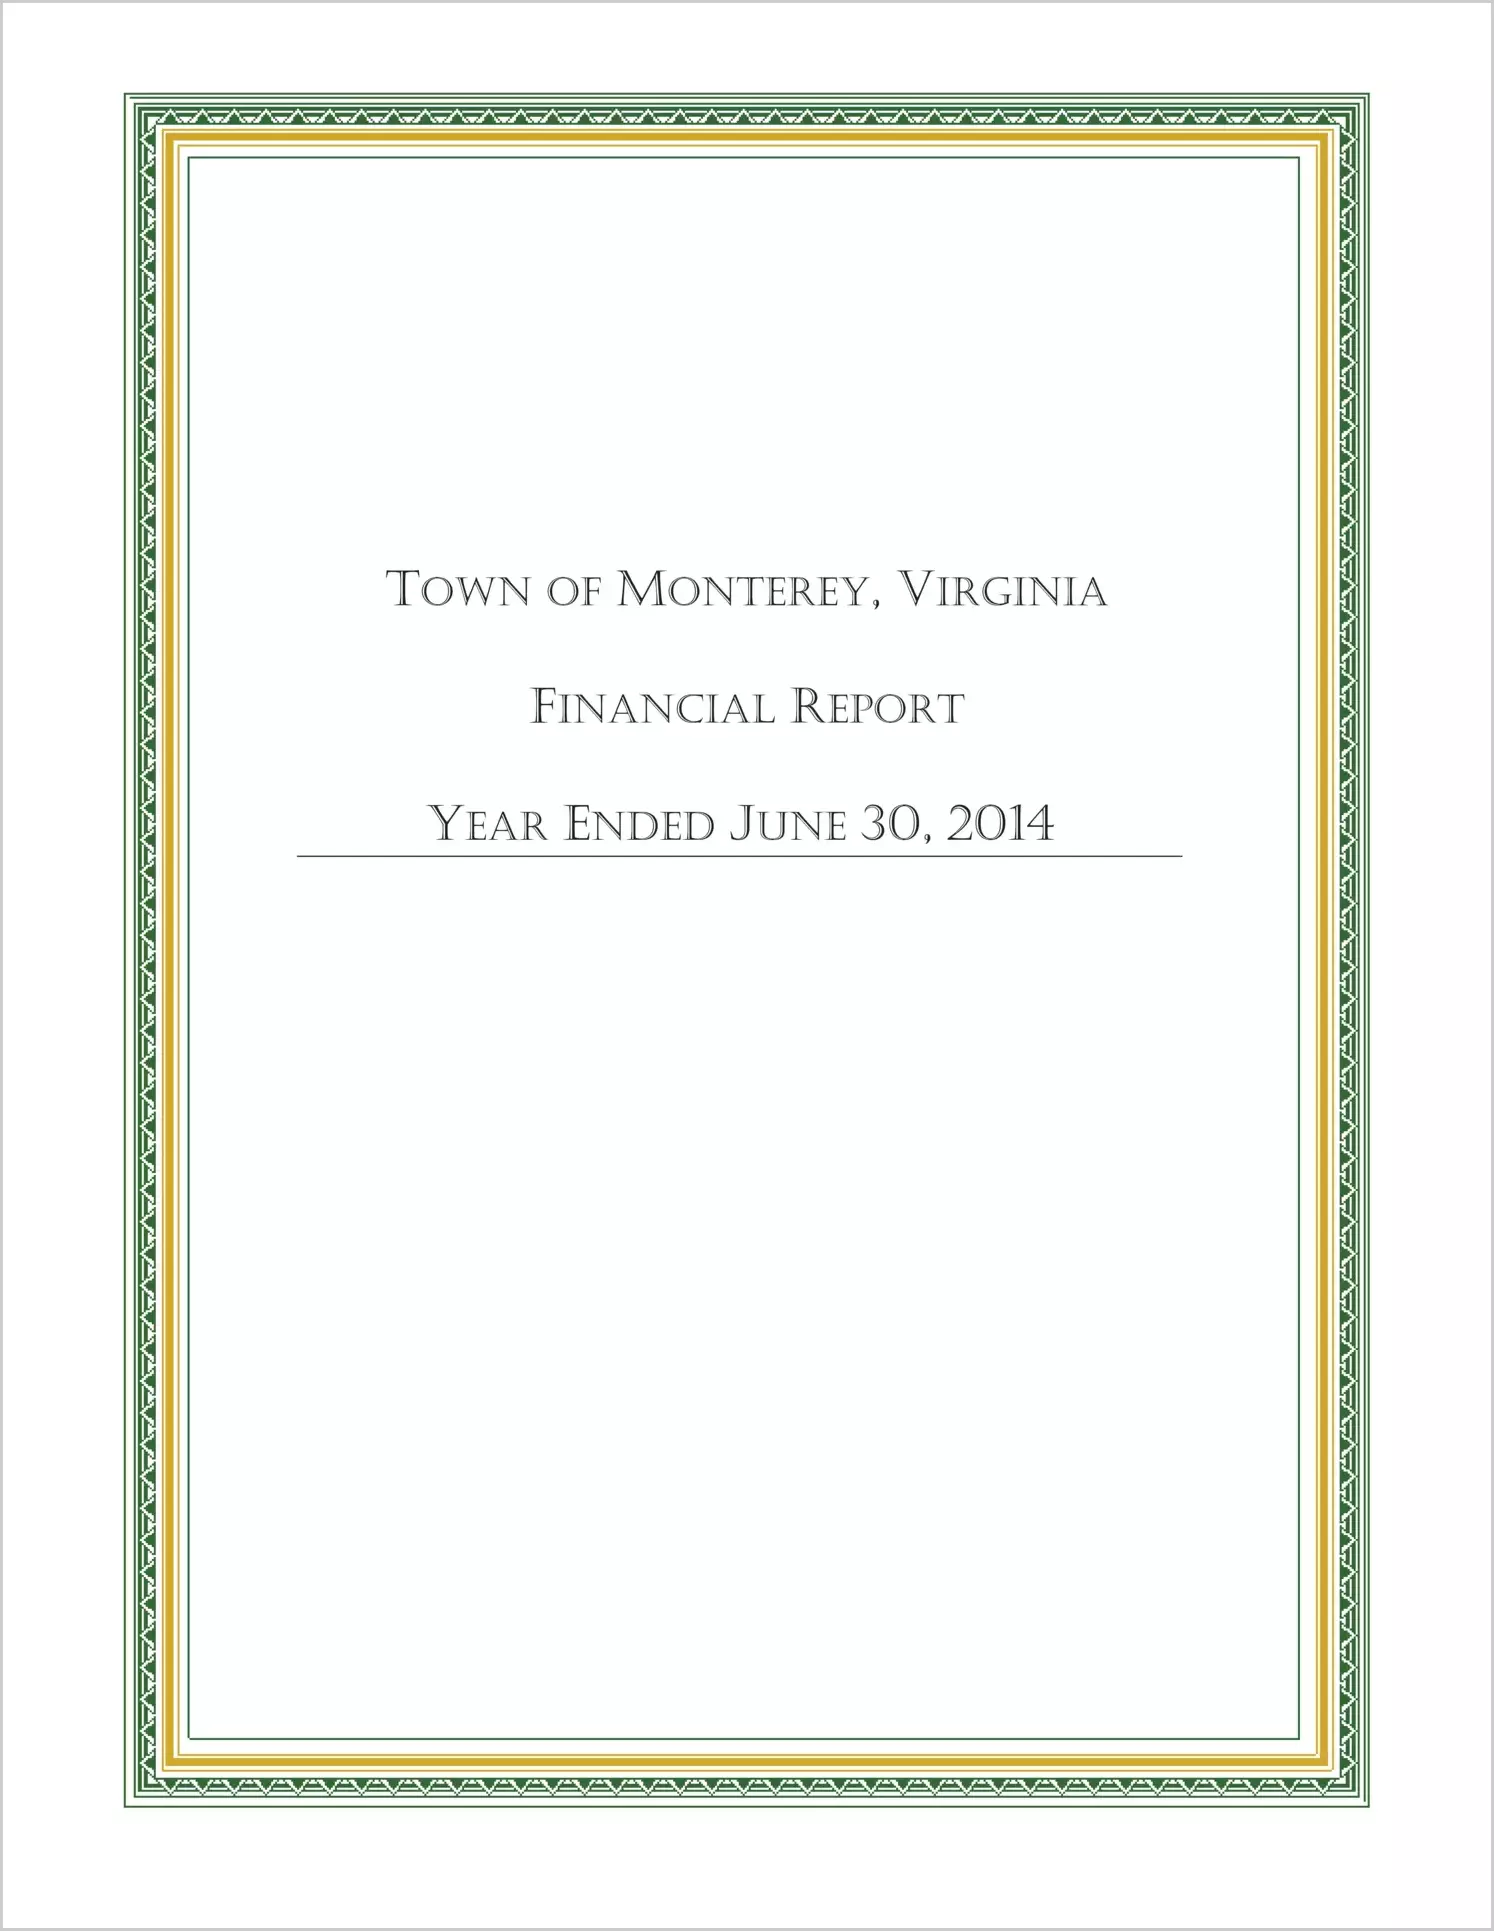 2014 Annual Financial Report for Town of Monterey